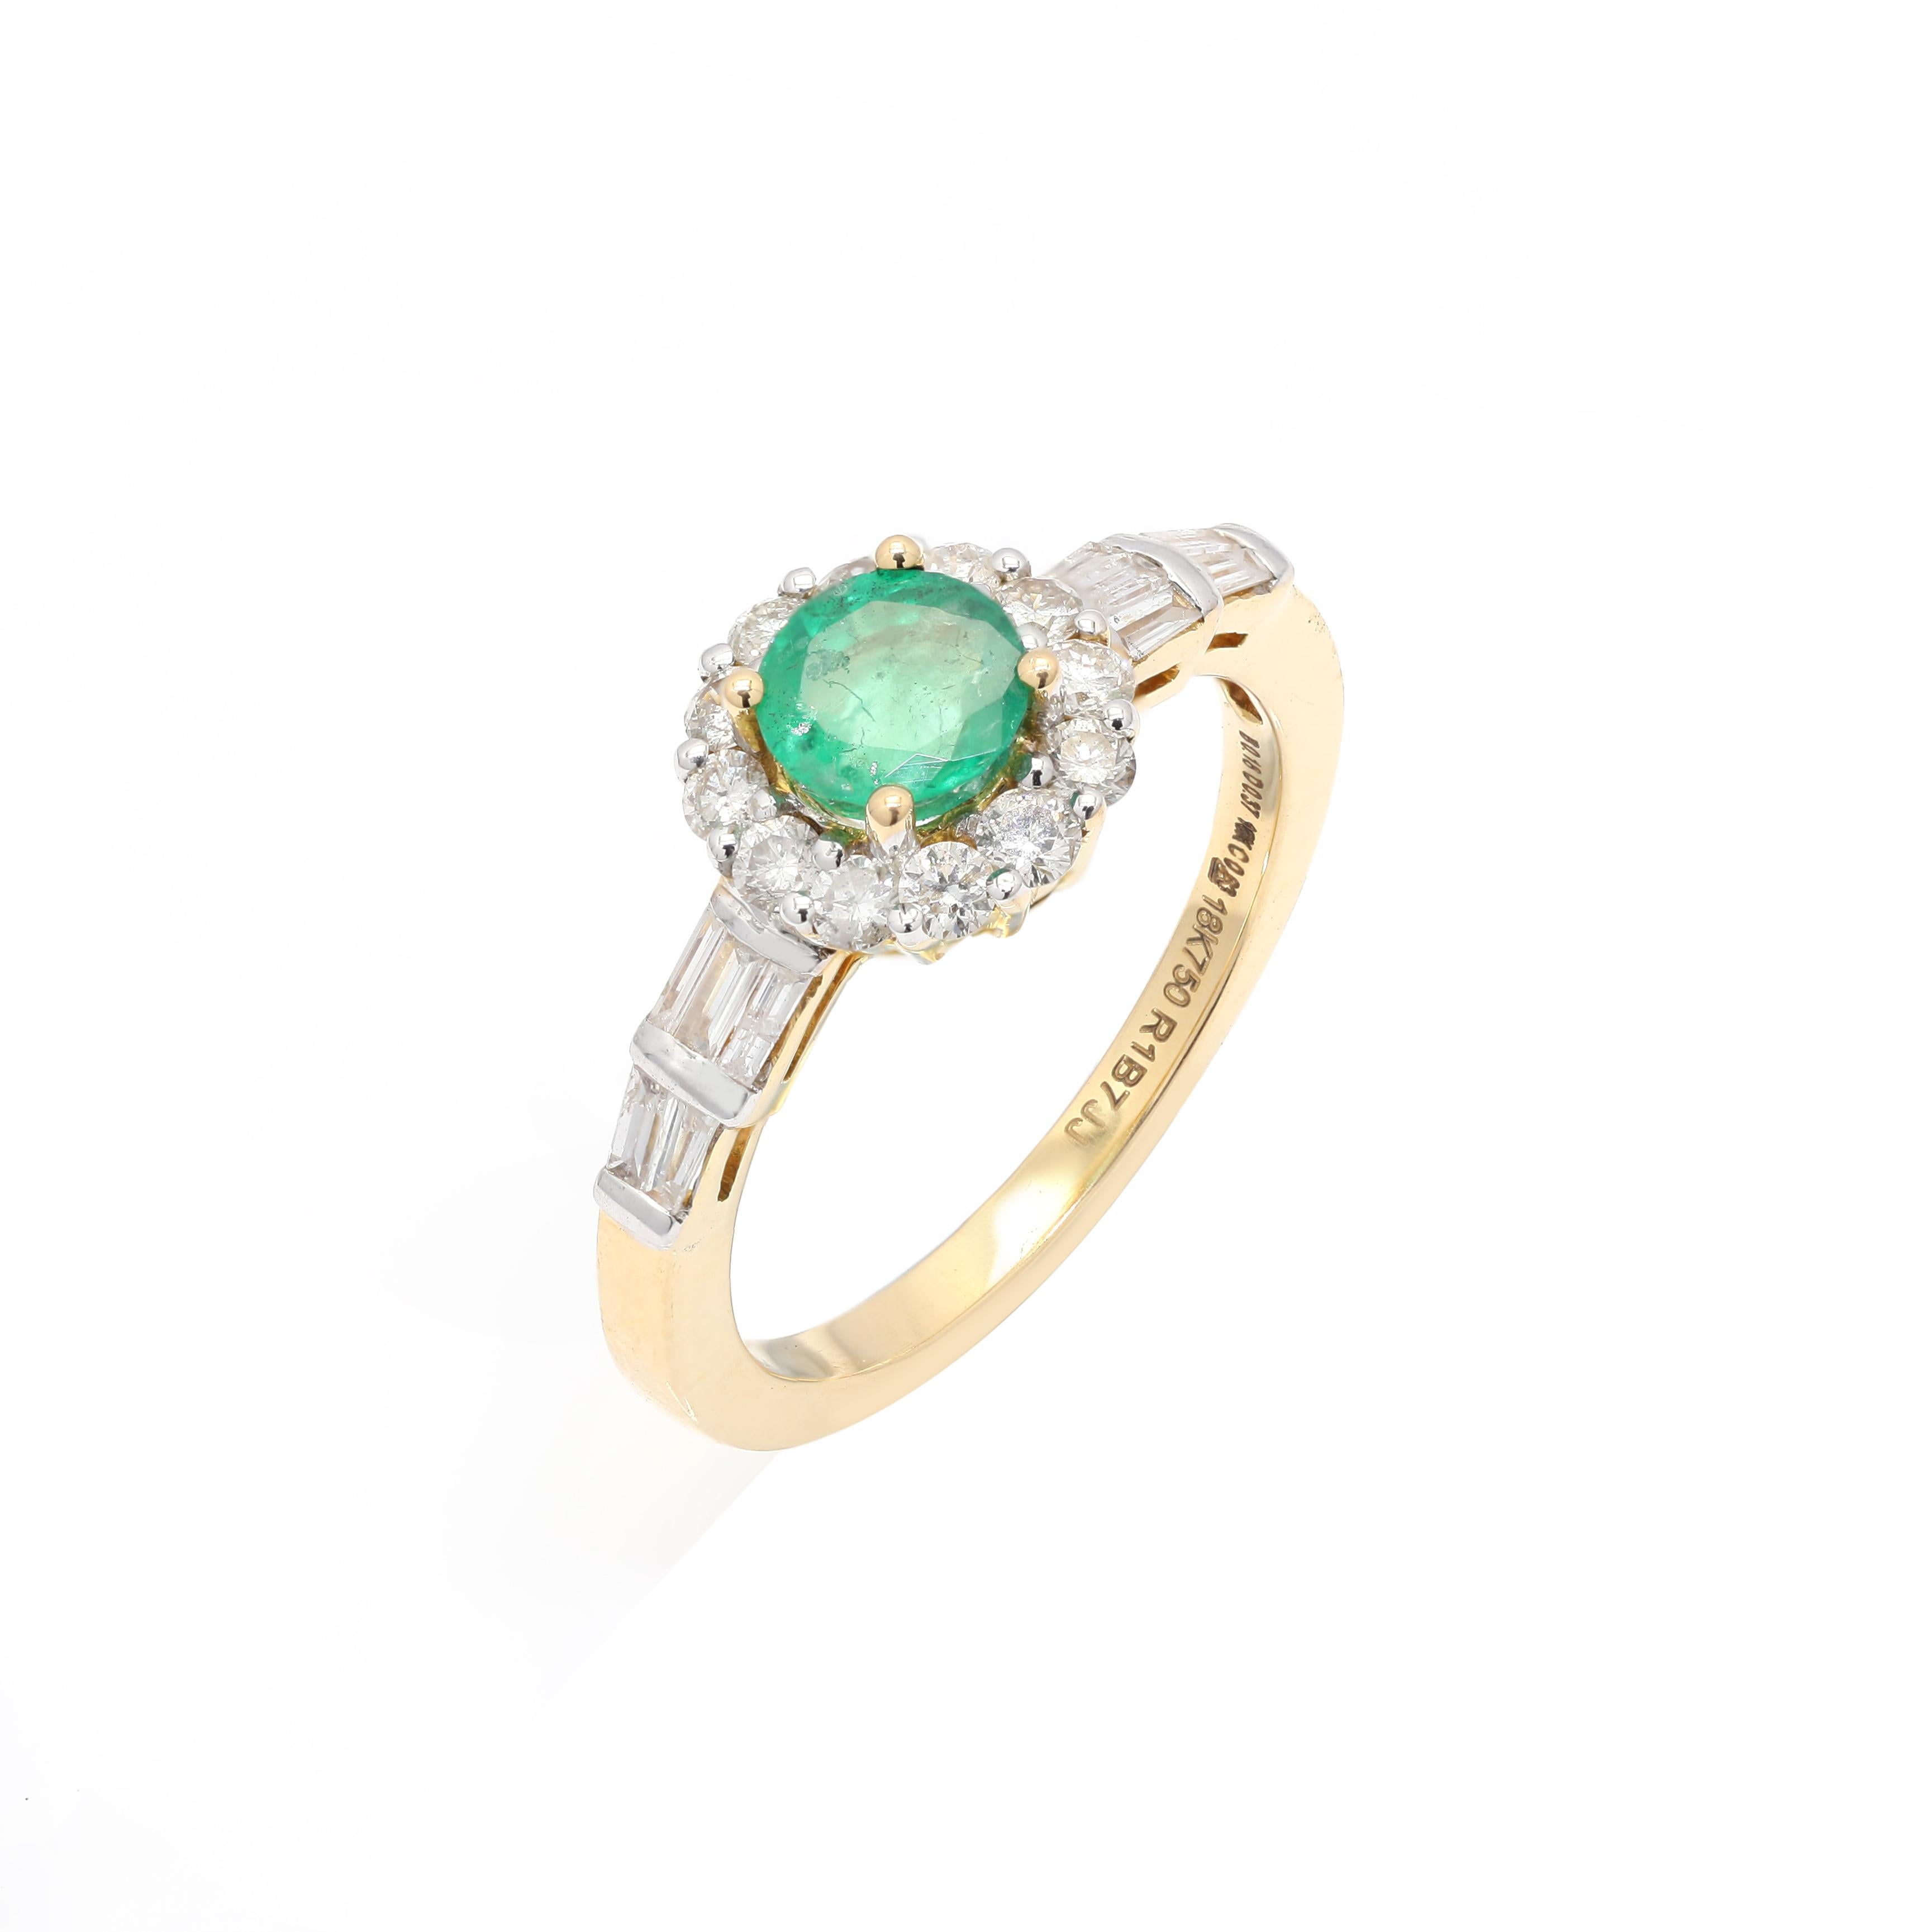 For Sale:  Basic Emerald Ring with Diamonds in 18 Karat Yellow Gold for Her 4